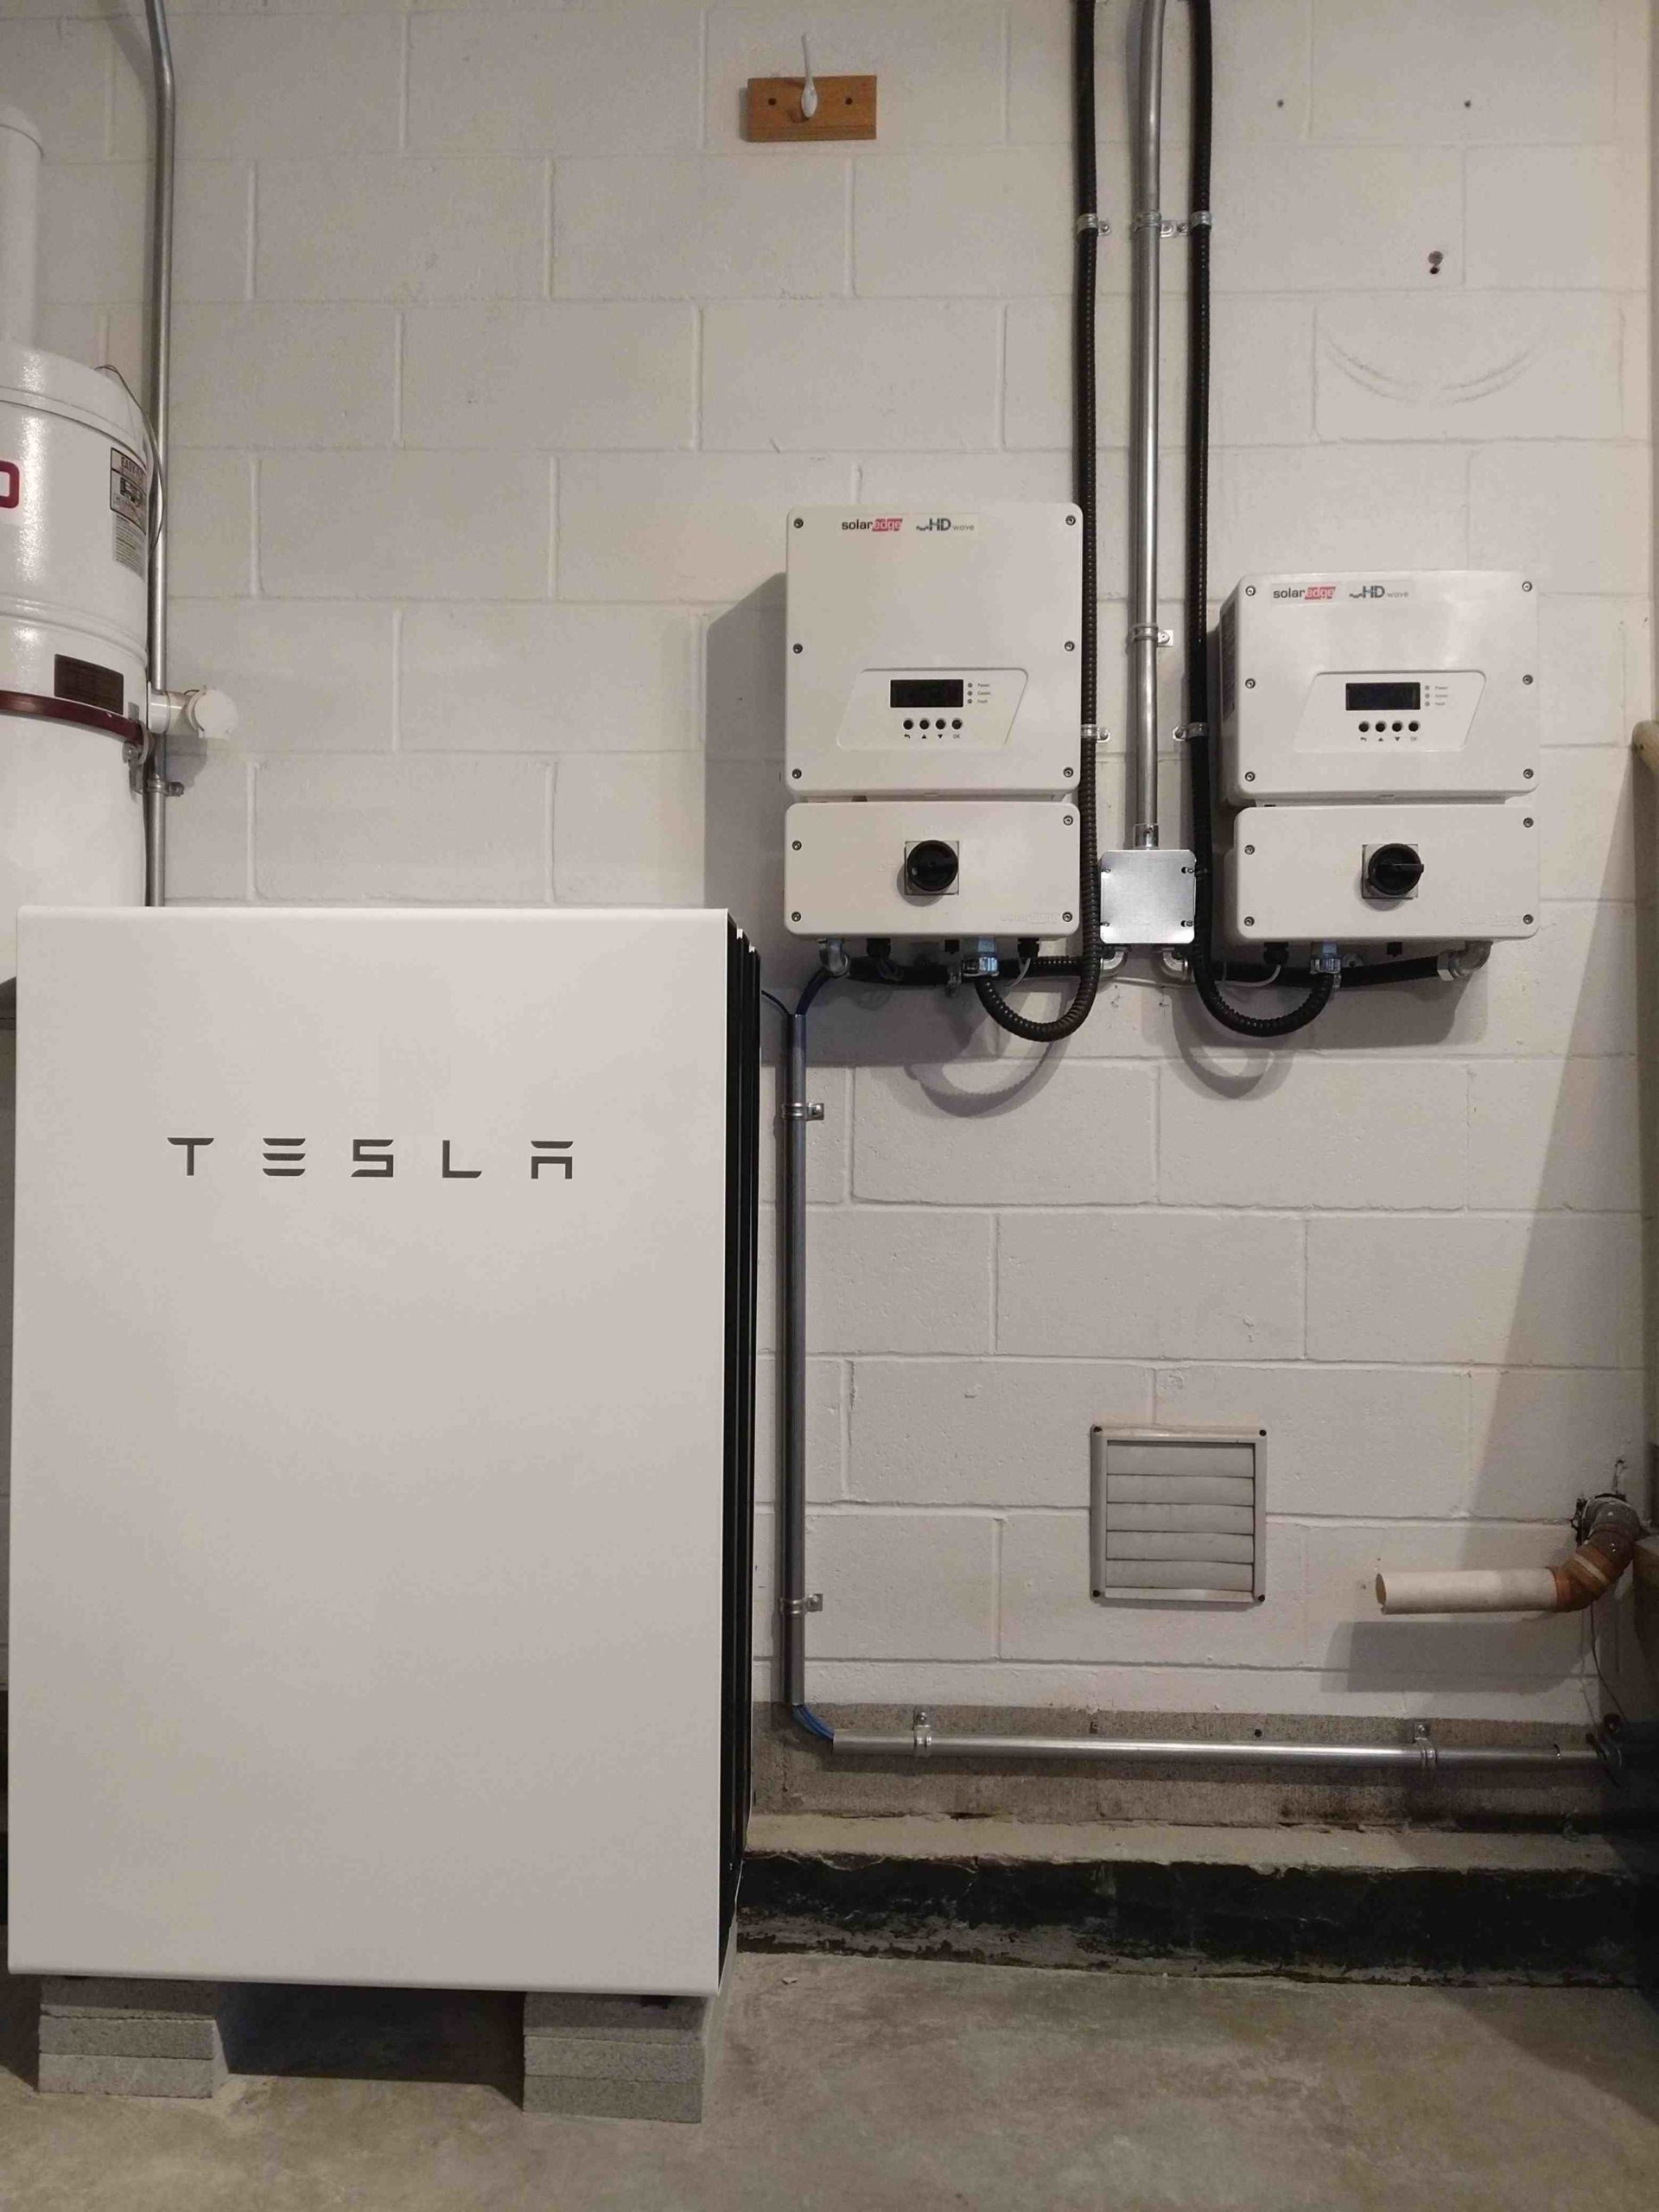 How long does it take to install a Tesla powerwall 2?